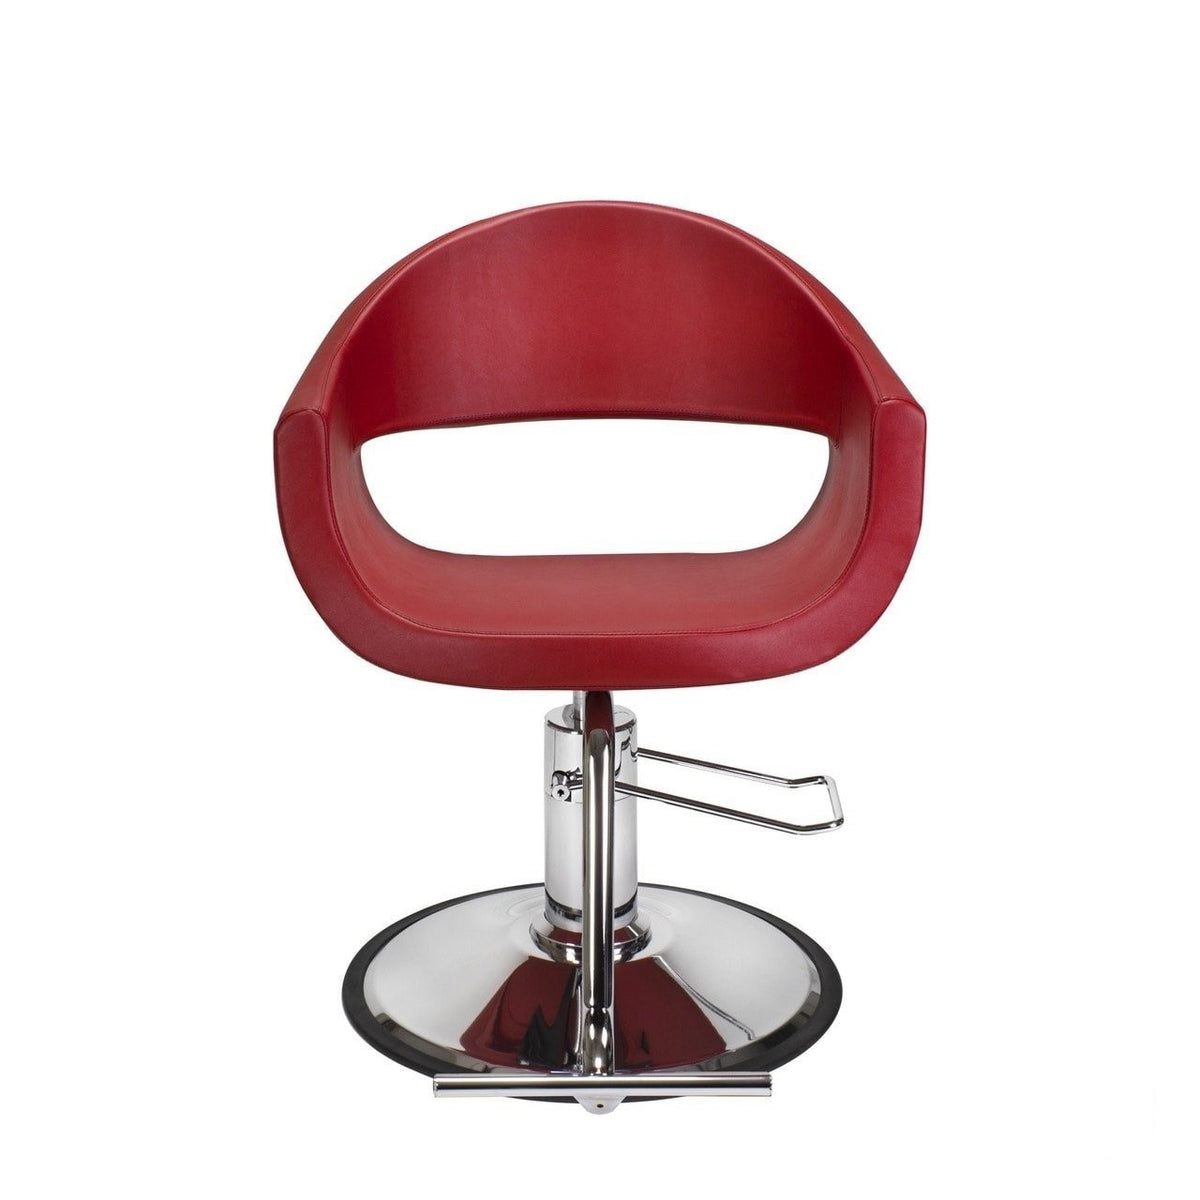 Berkeley Berkeley Milla Styling Chair Styling Chair - ChairsThatGive